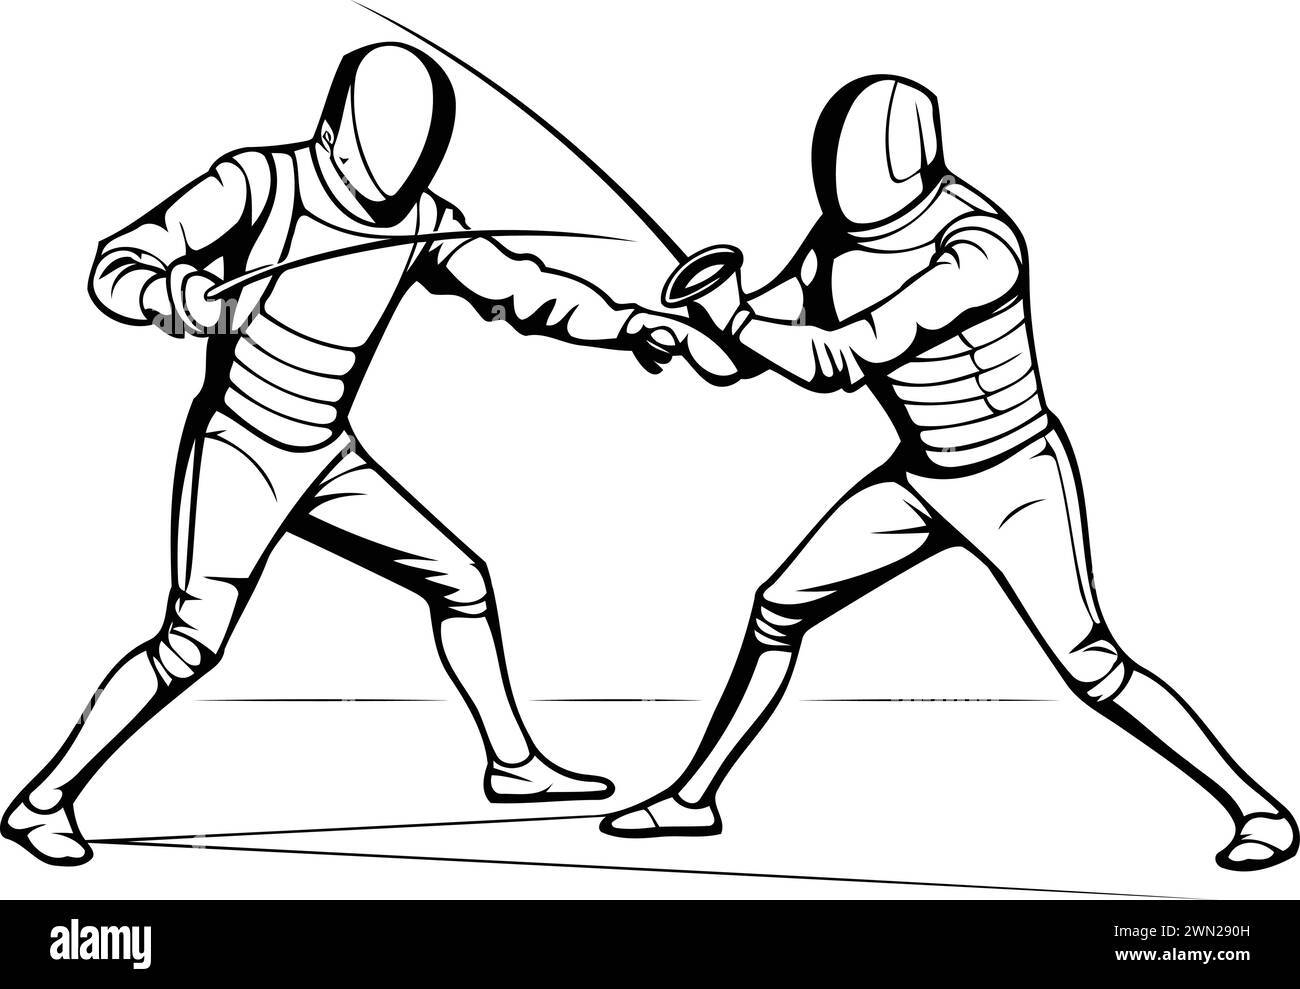 Fencing players action cartoon graphic vector. Hand drawn fencing sport design. Stock Vector